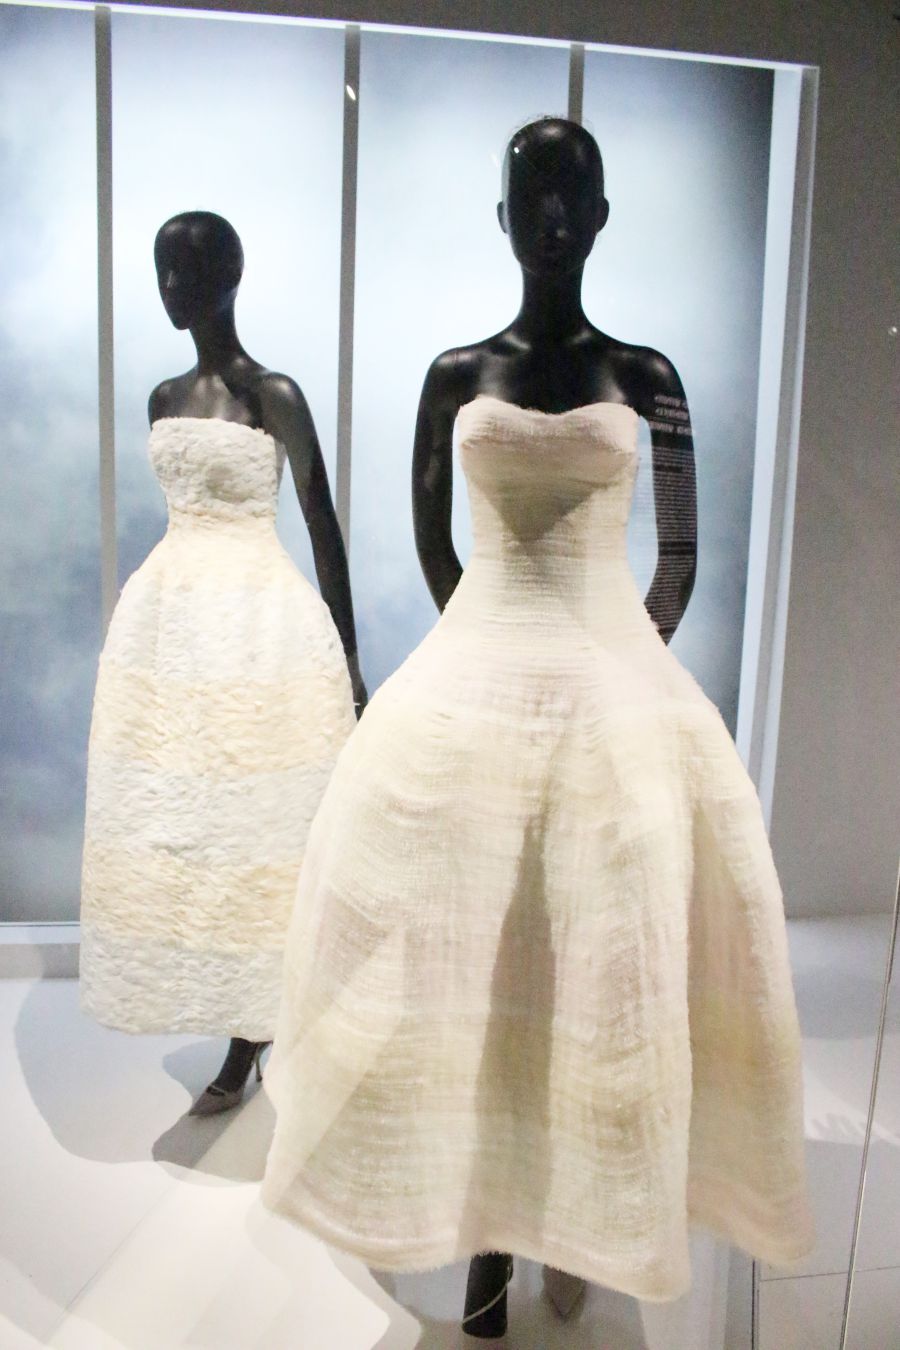 L'exposition Christian Dior